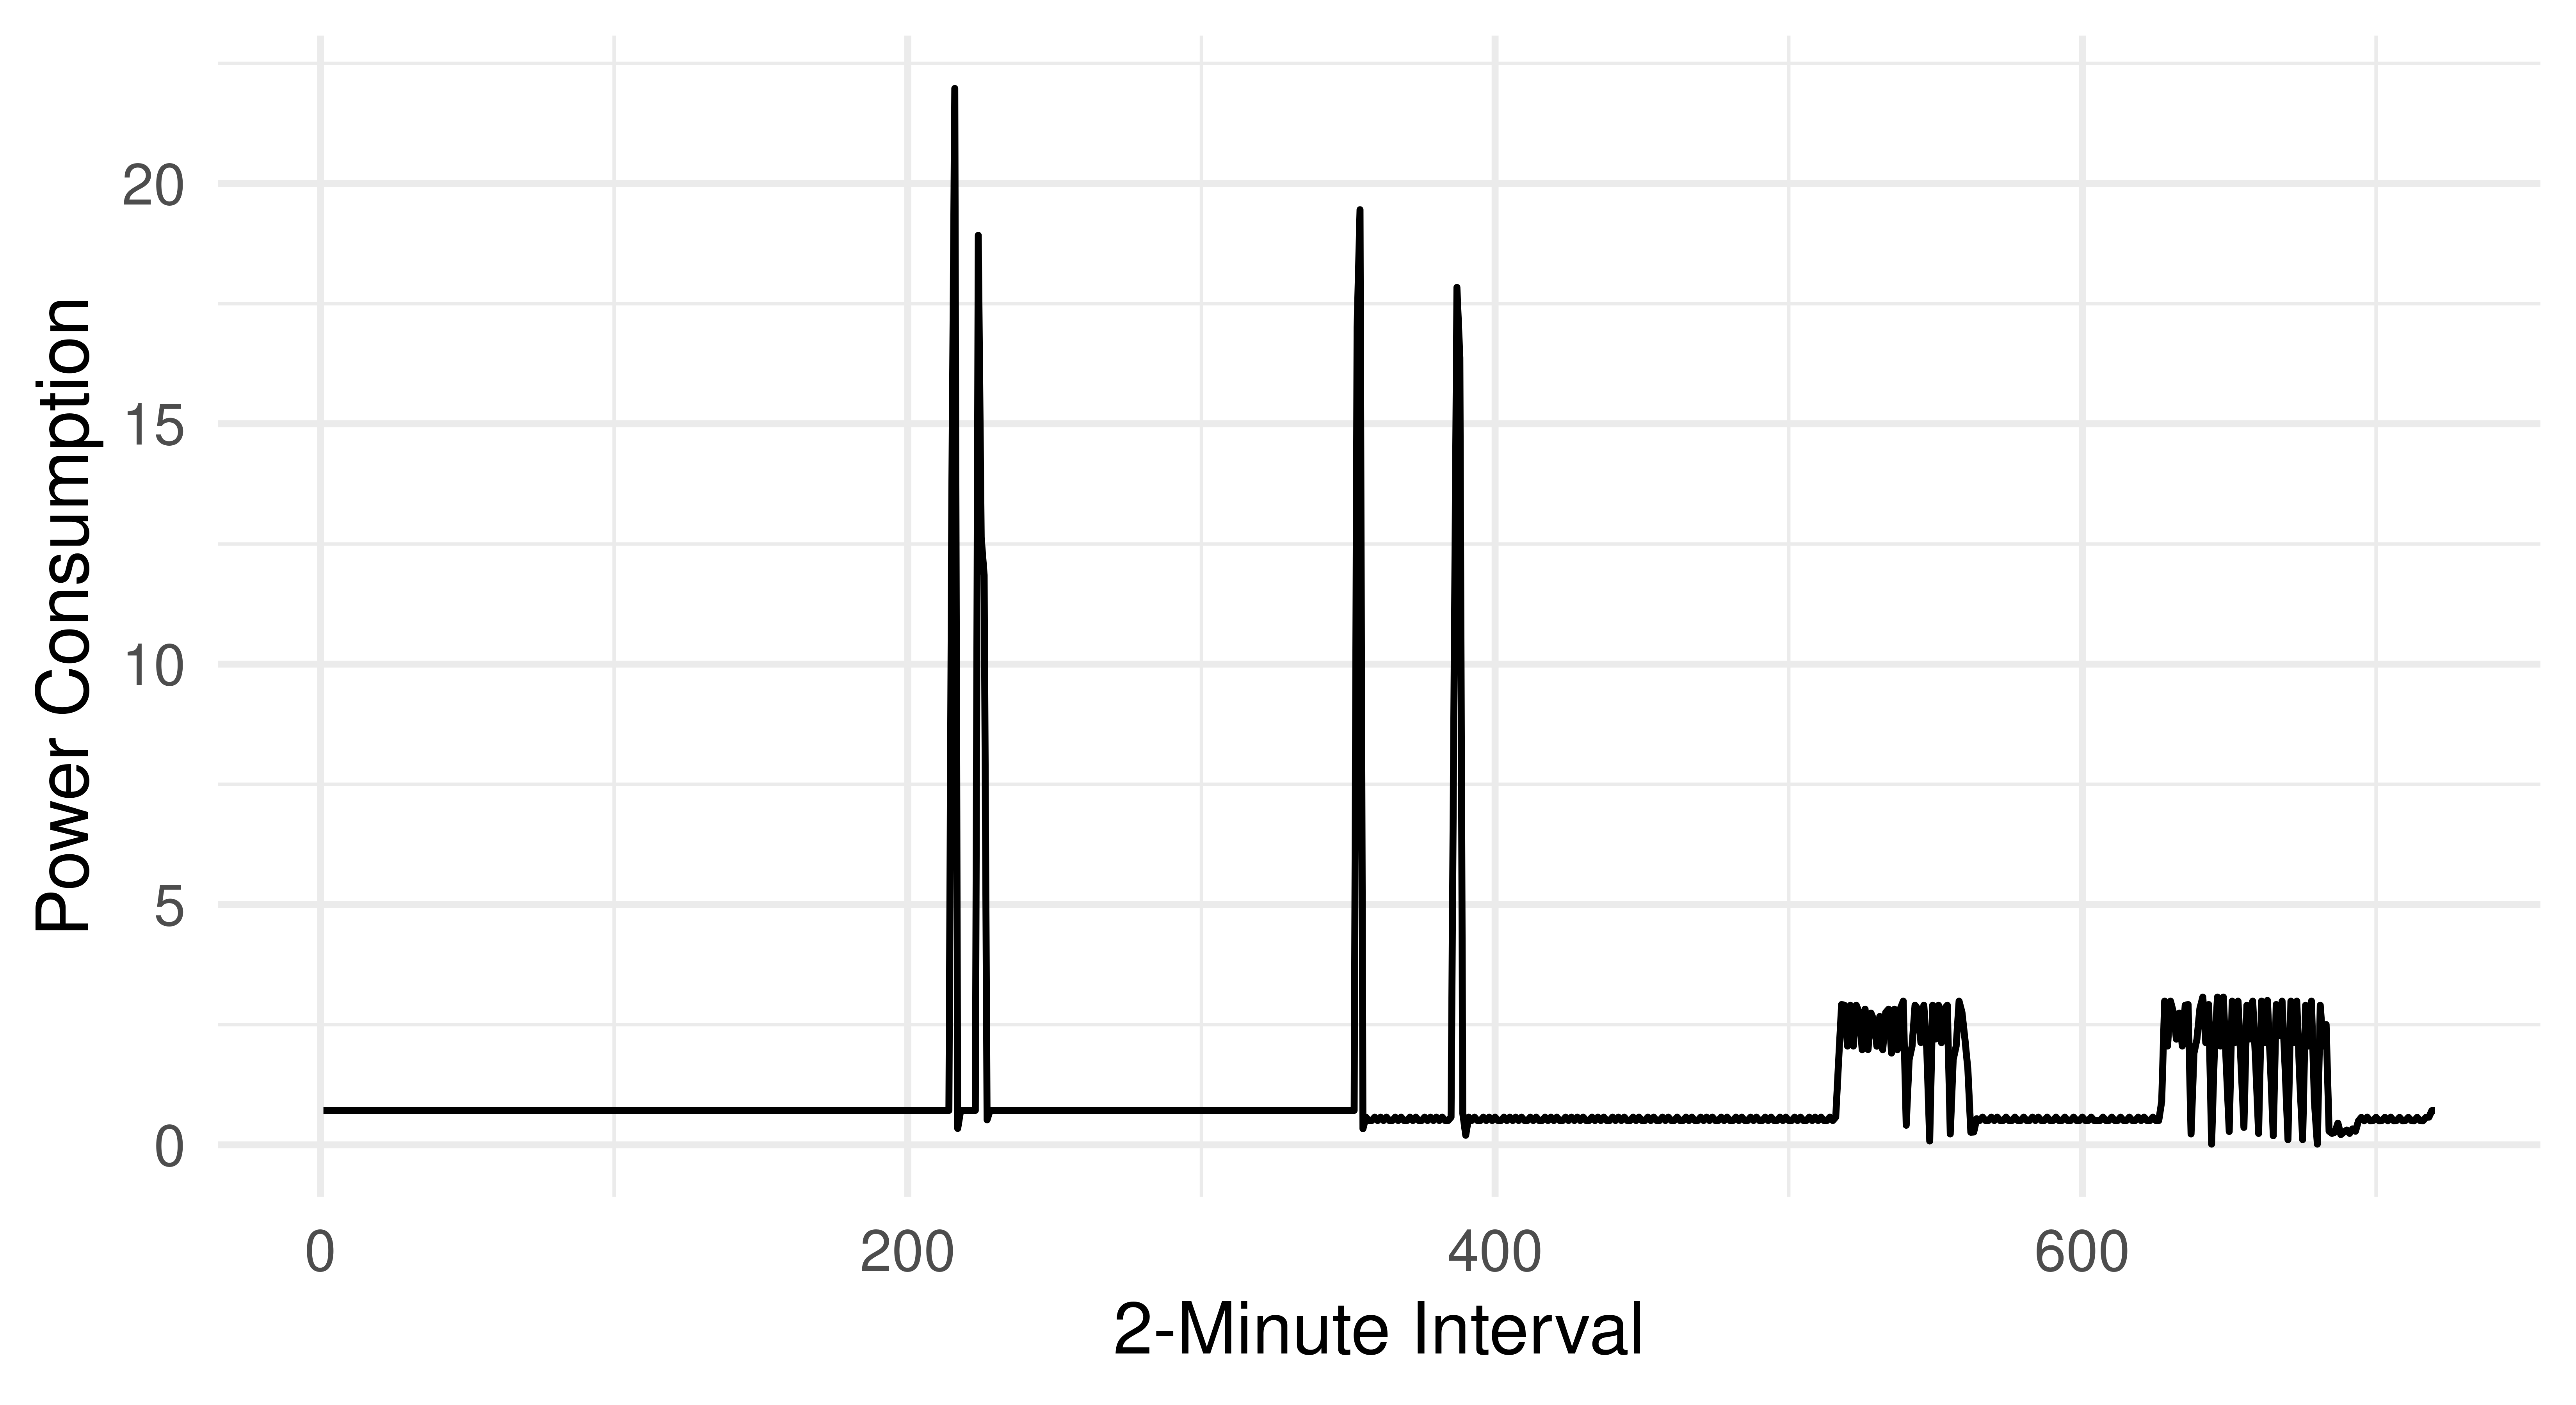 Line plot with '2-Minute Interval' on axis ranging from 1 to 720 and 'Power Consumption' on y-axis ranging from 0 to 20. There are spikes at around (200, 20), (300, 20), and then some consistently raised usage between (500-700, 3).